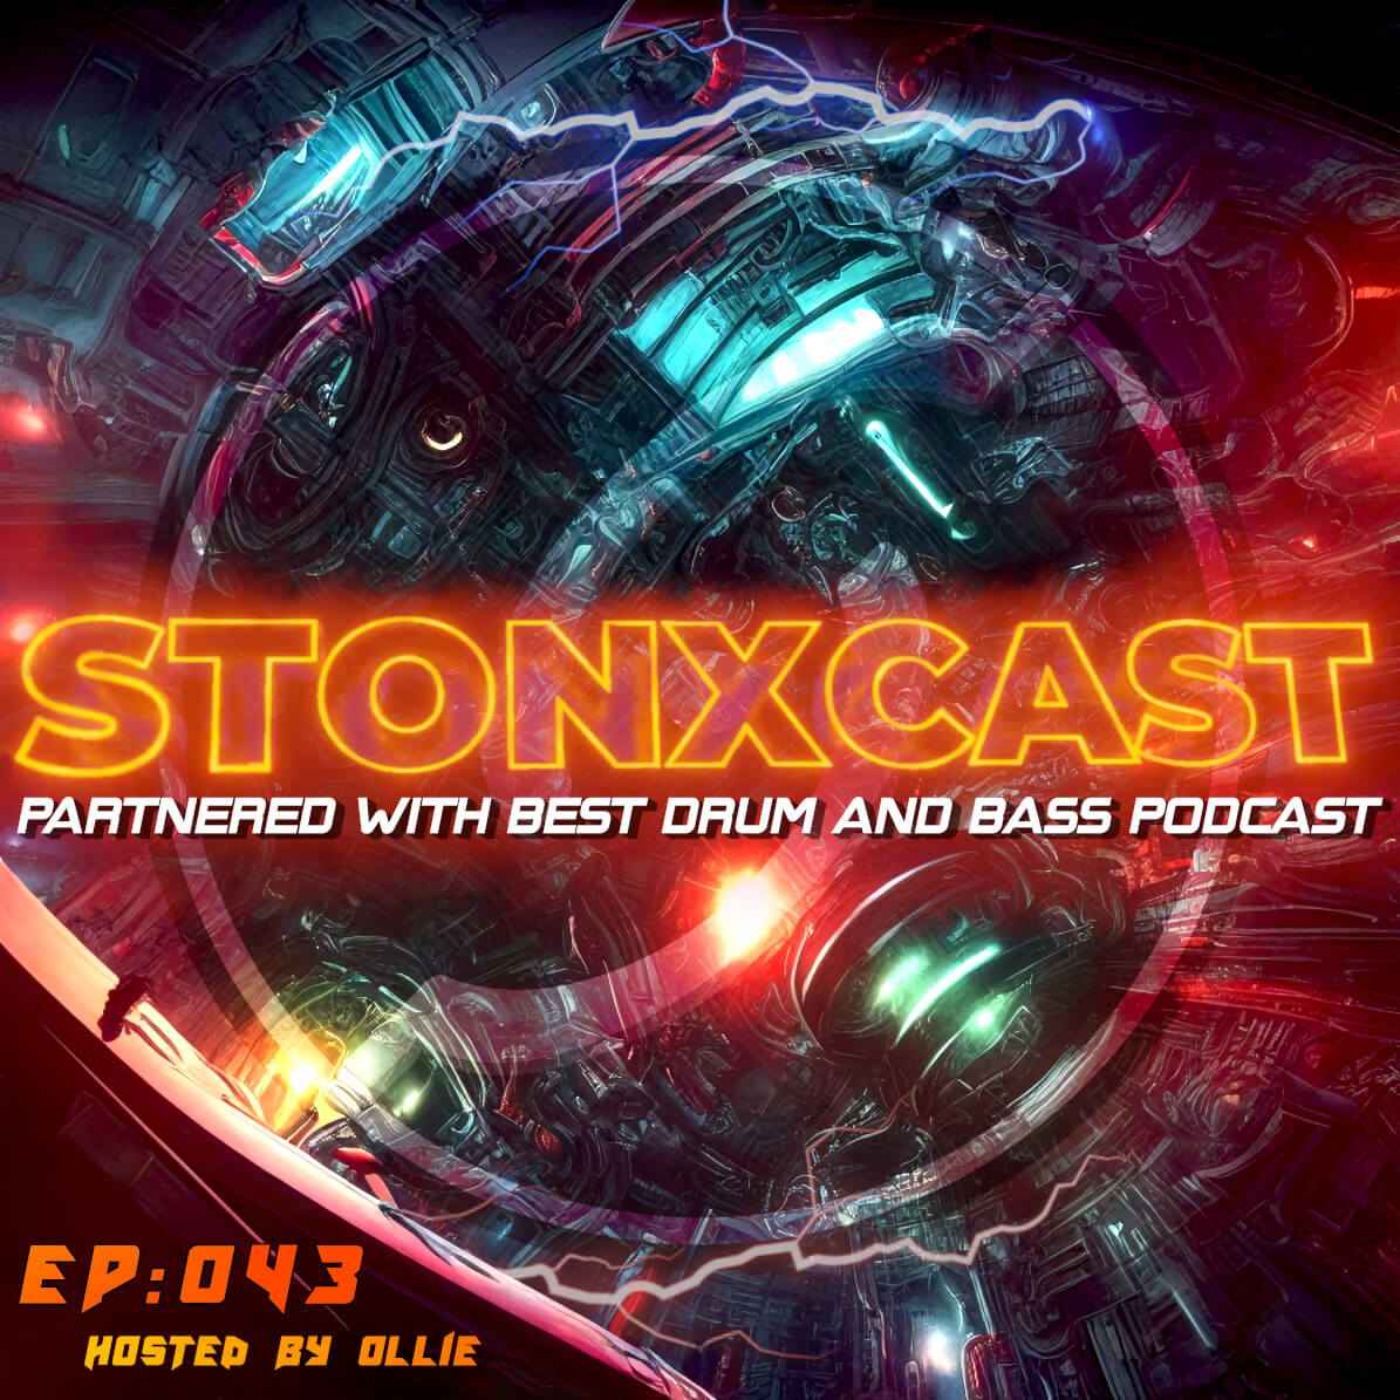 Stonxcast EP:043 - Hosted by Ollie Artwork